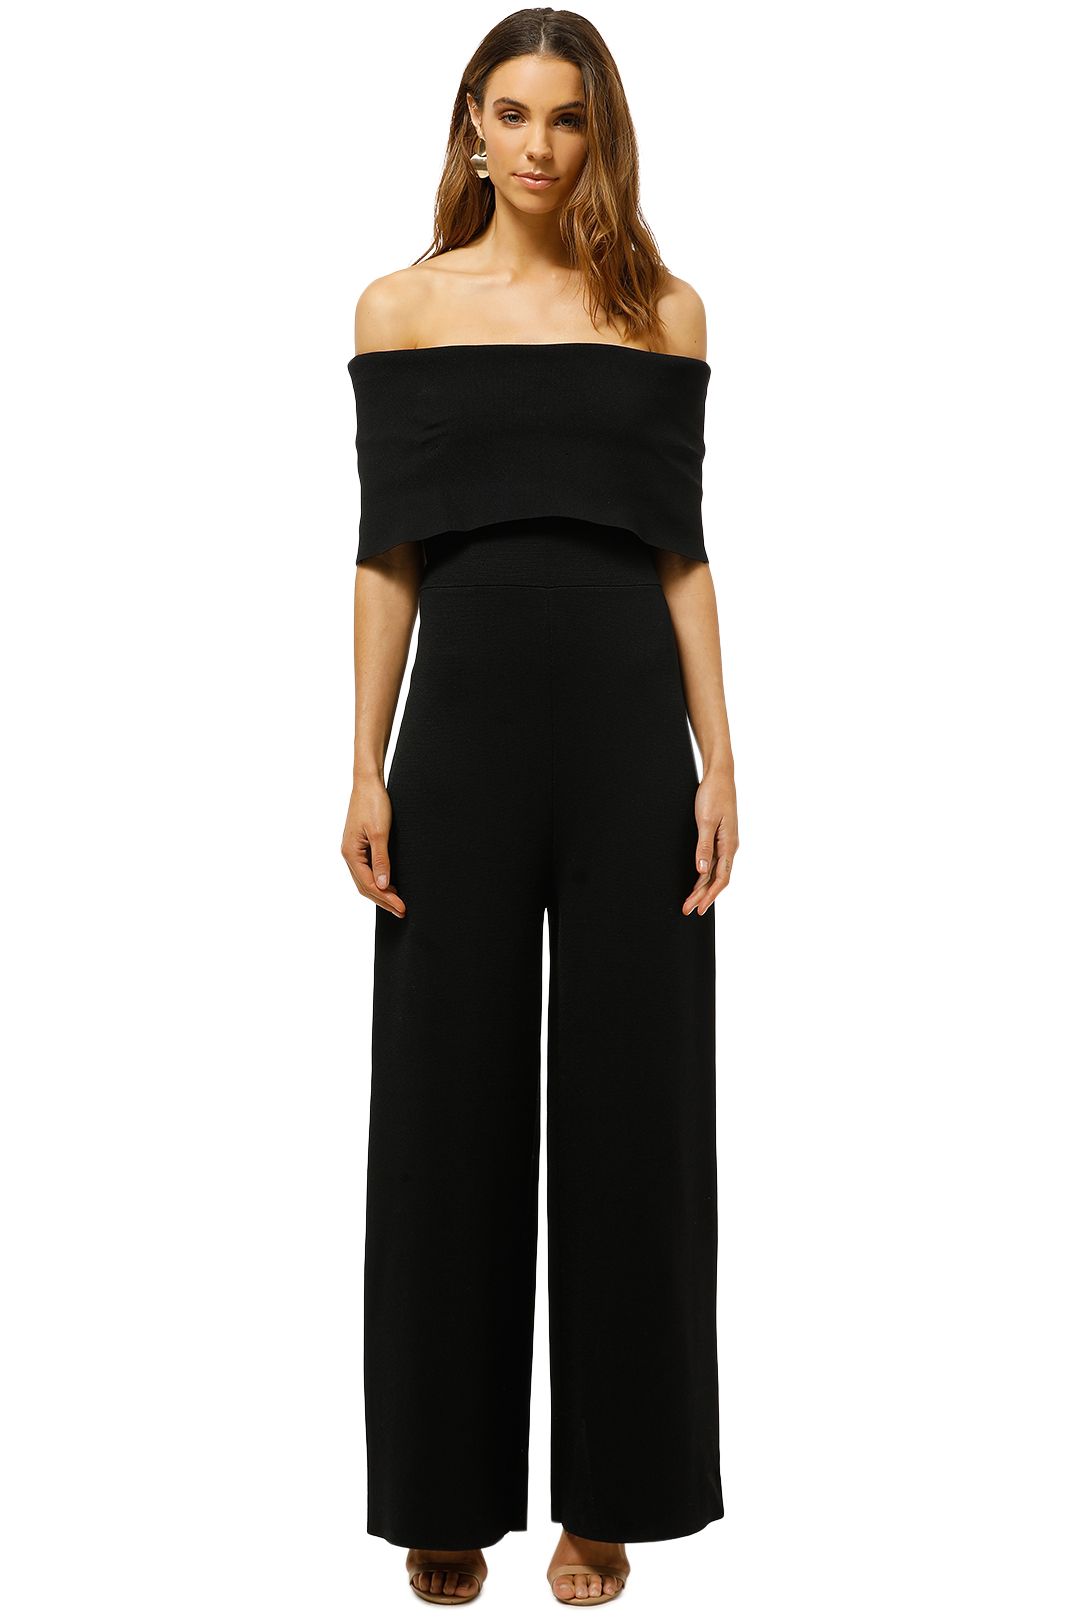 Fold Over Knit Jumpsuit by Witchery for Hire